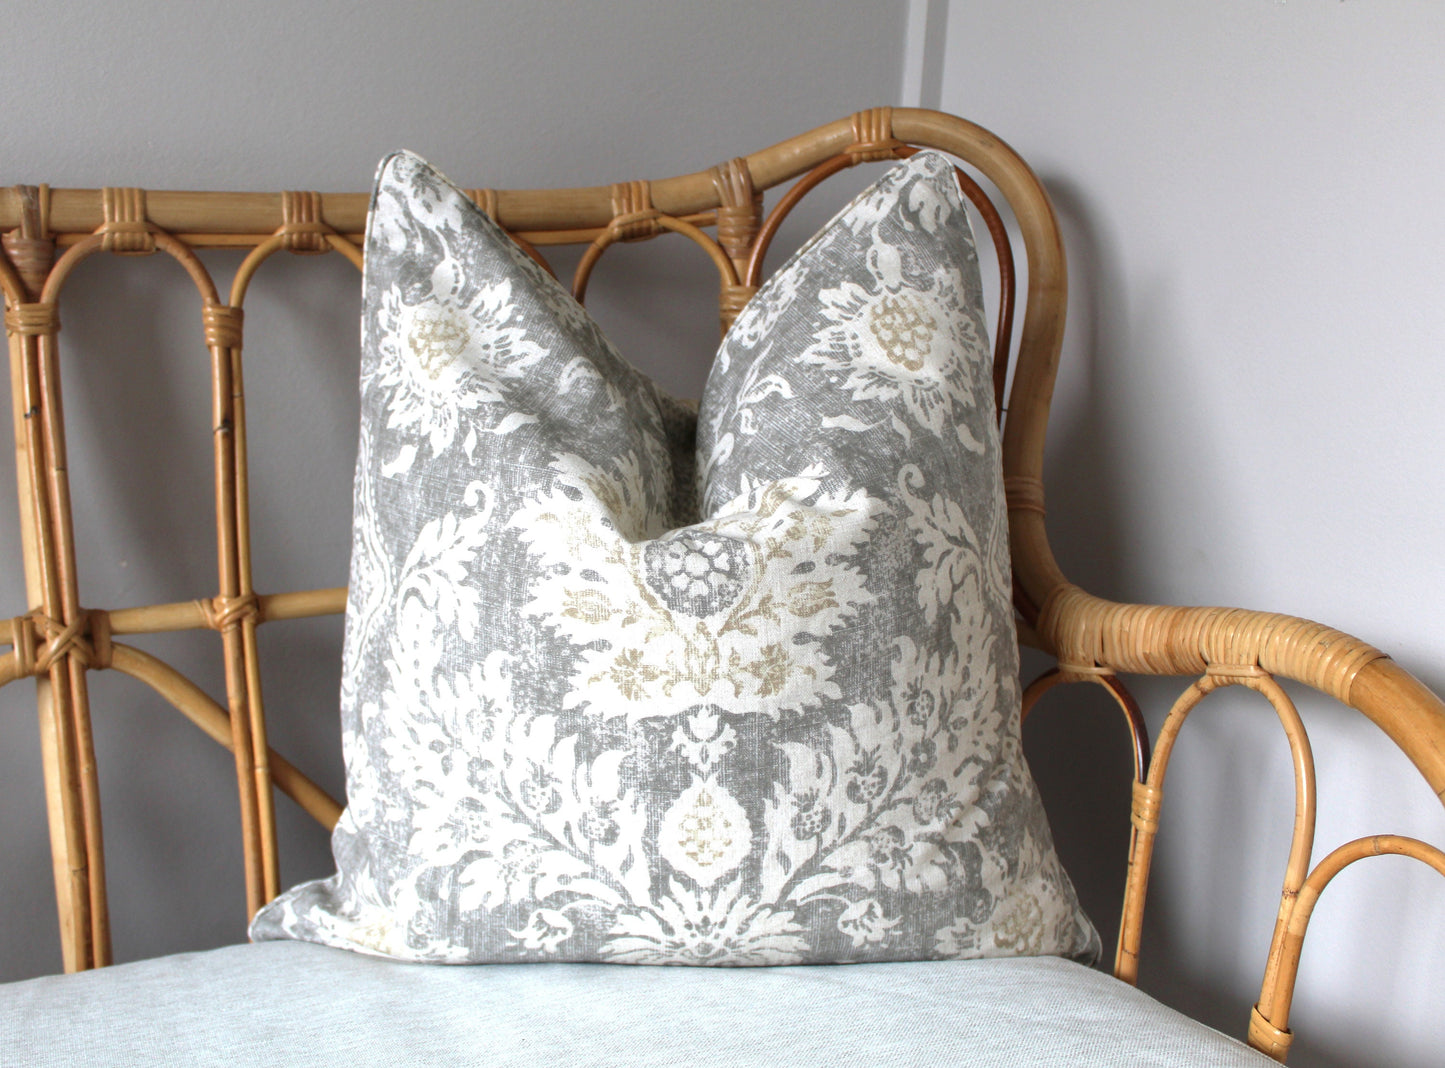 Rustic off white cushion covers